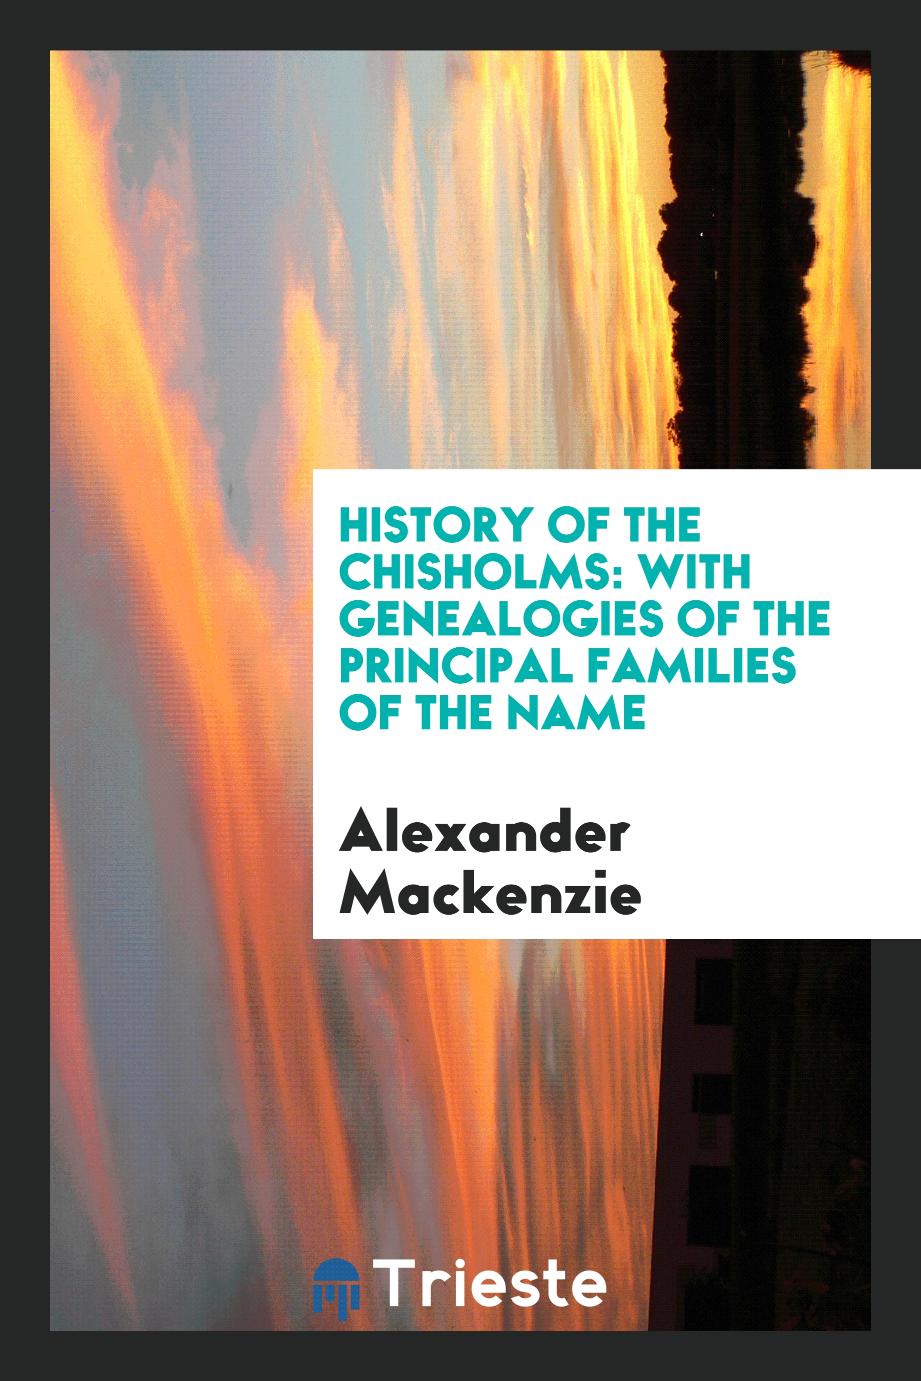 History of the Chisholms: with genealogies of the principal families of the name